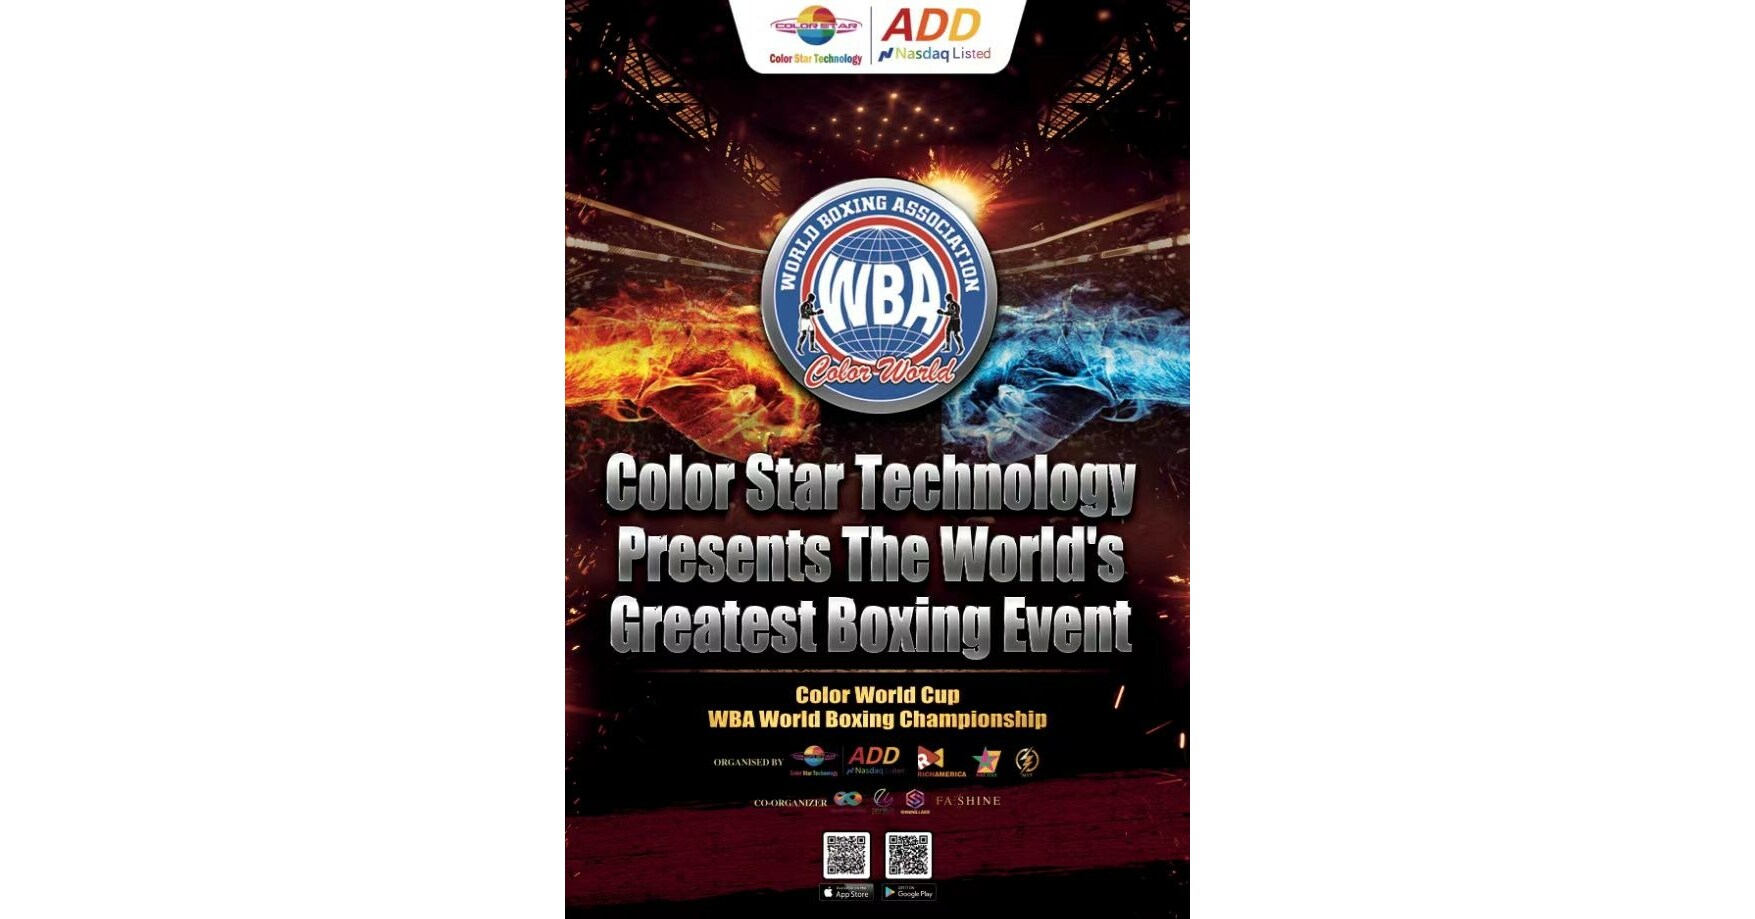 Color Star Will Host Color Cup WBA World Boxing Championships - First Fight Will Be Held in Dubai